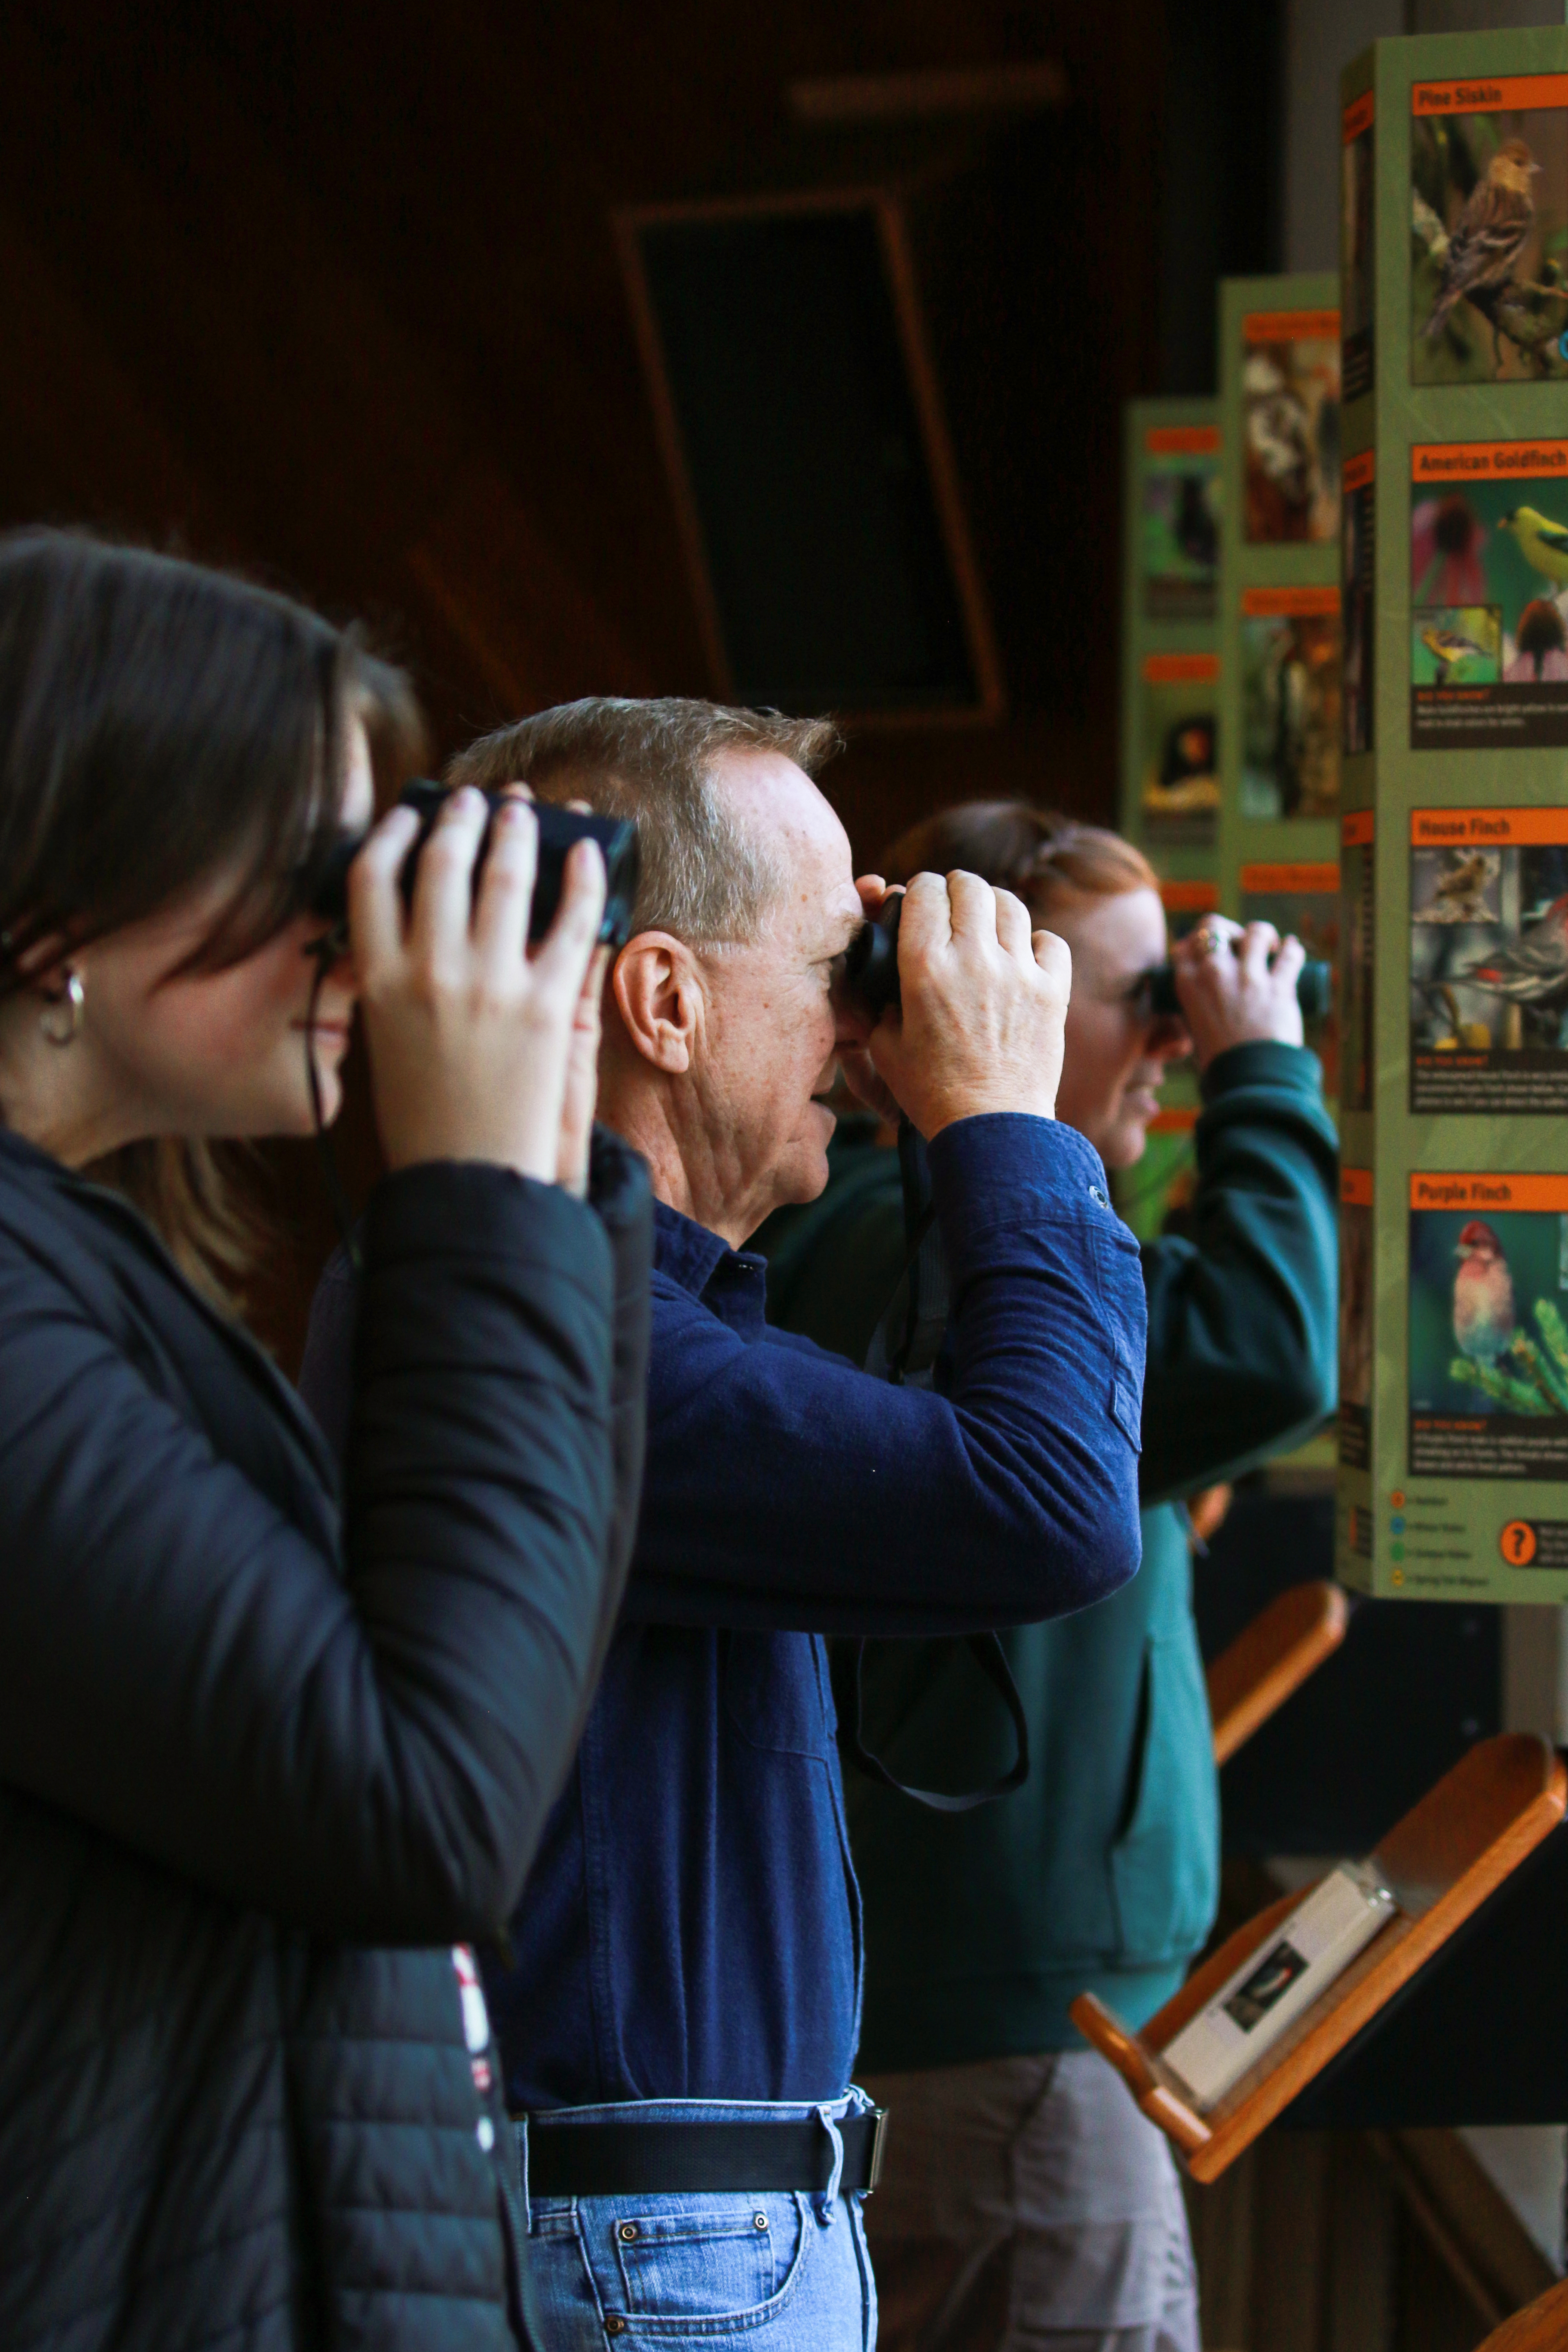 Group of bird watchers at bird viewing window in Rowe Visitor Center.